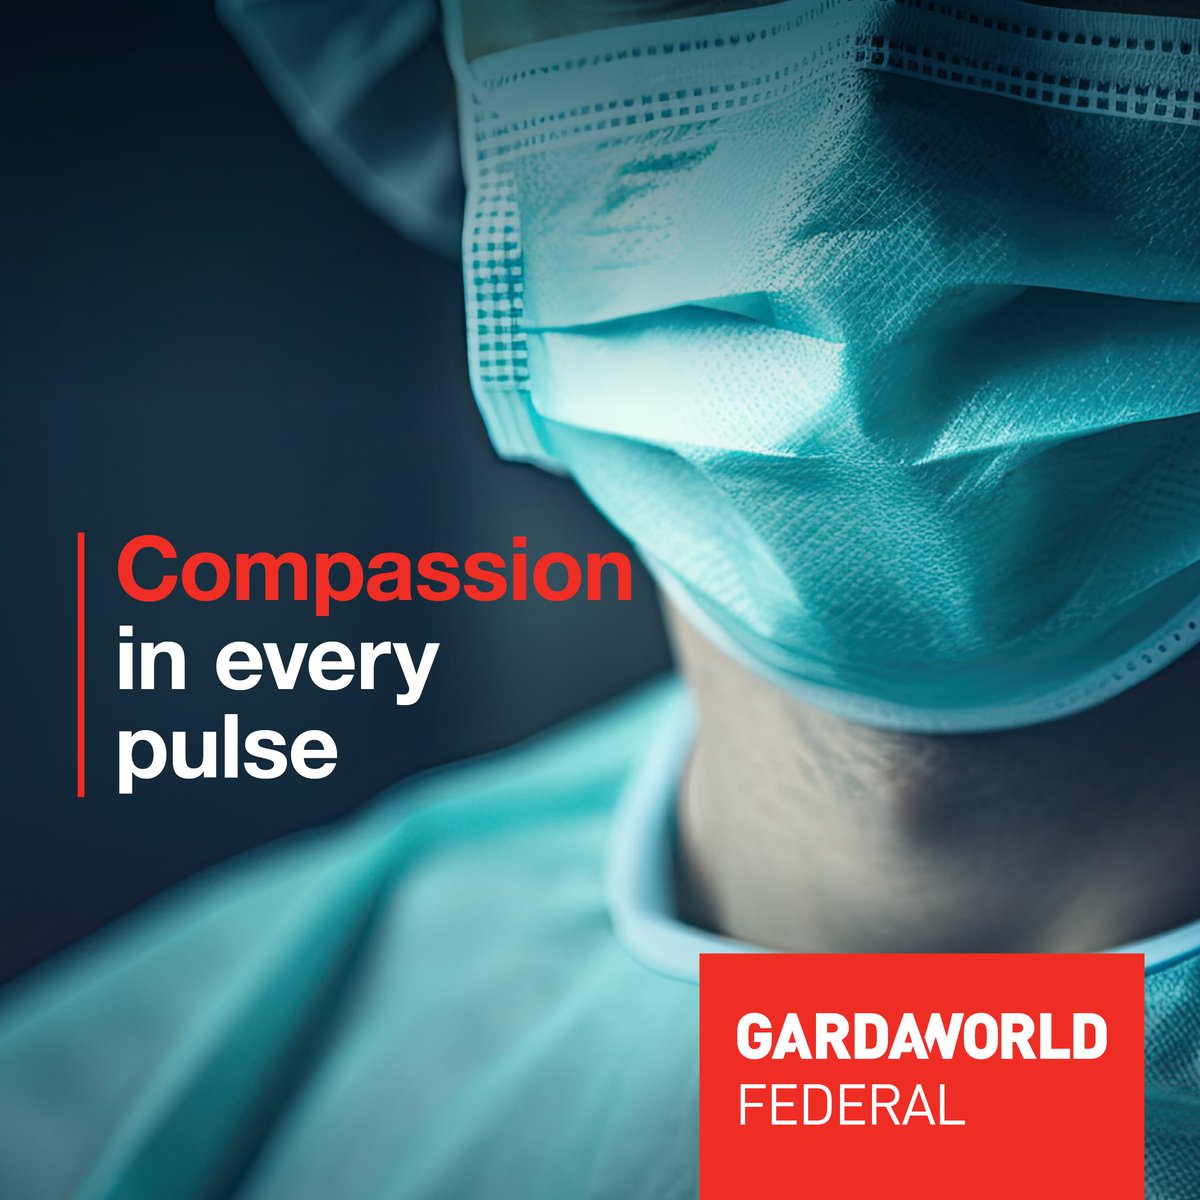 At GardaWorld Federal, our medical heroes embody compassion with every heartbeat. Experience where human touch meets medical excellence.

Learn more: brnw.ch/21wJNe9. 

#Compassion #MedicalExcellence #HumanTouch